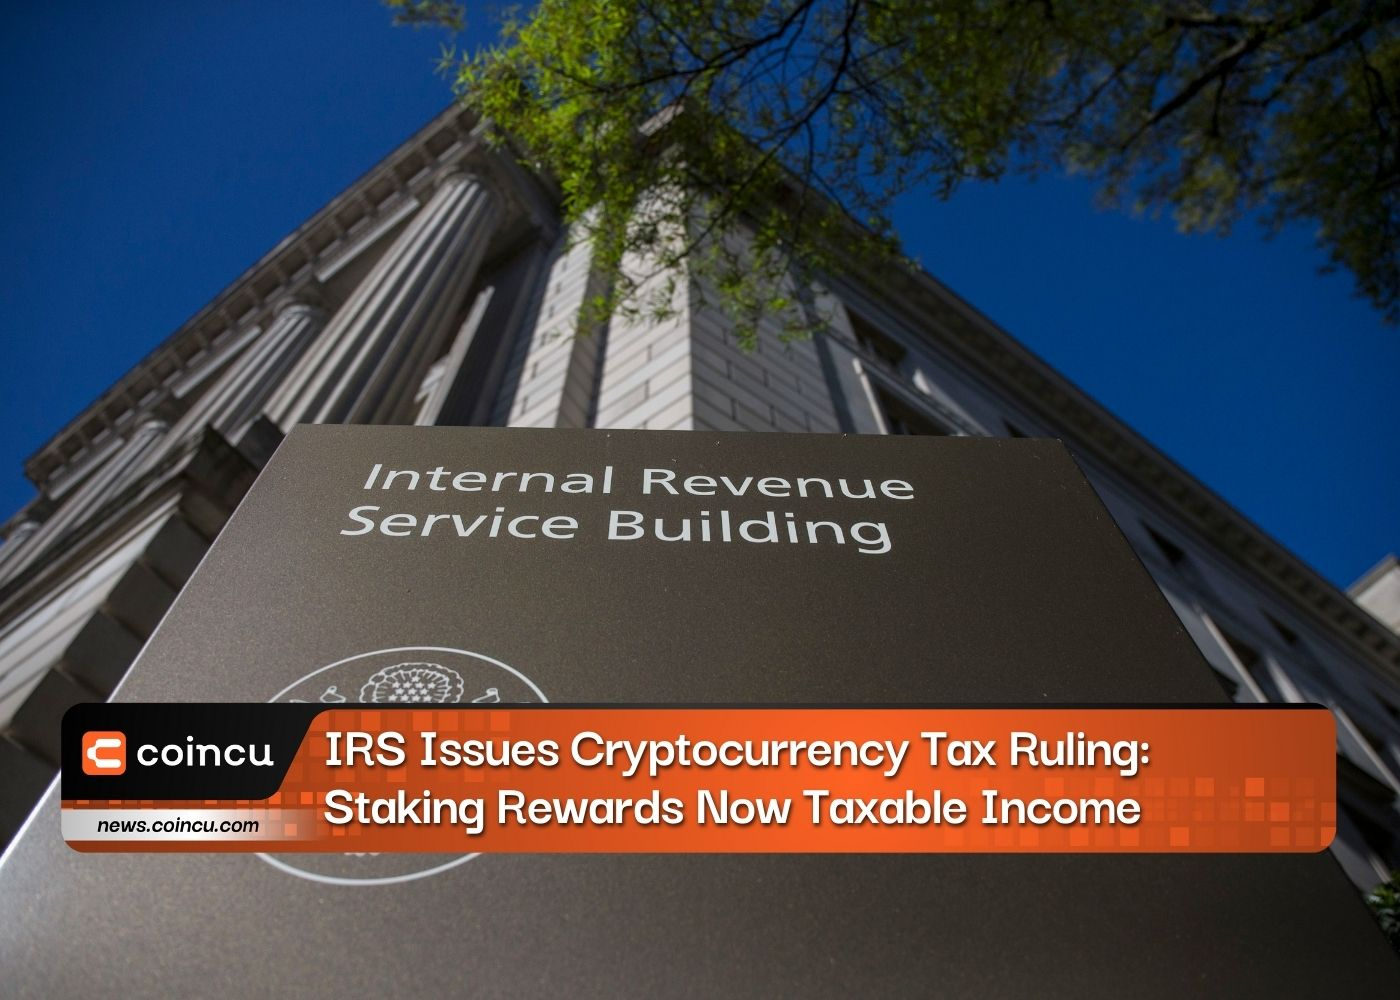 IRS Issues Cryptocurrency Tax Ruling: Staking Rewards Now Taxable Income